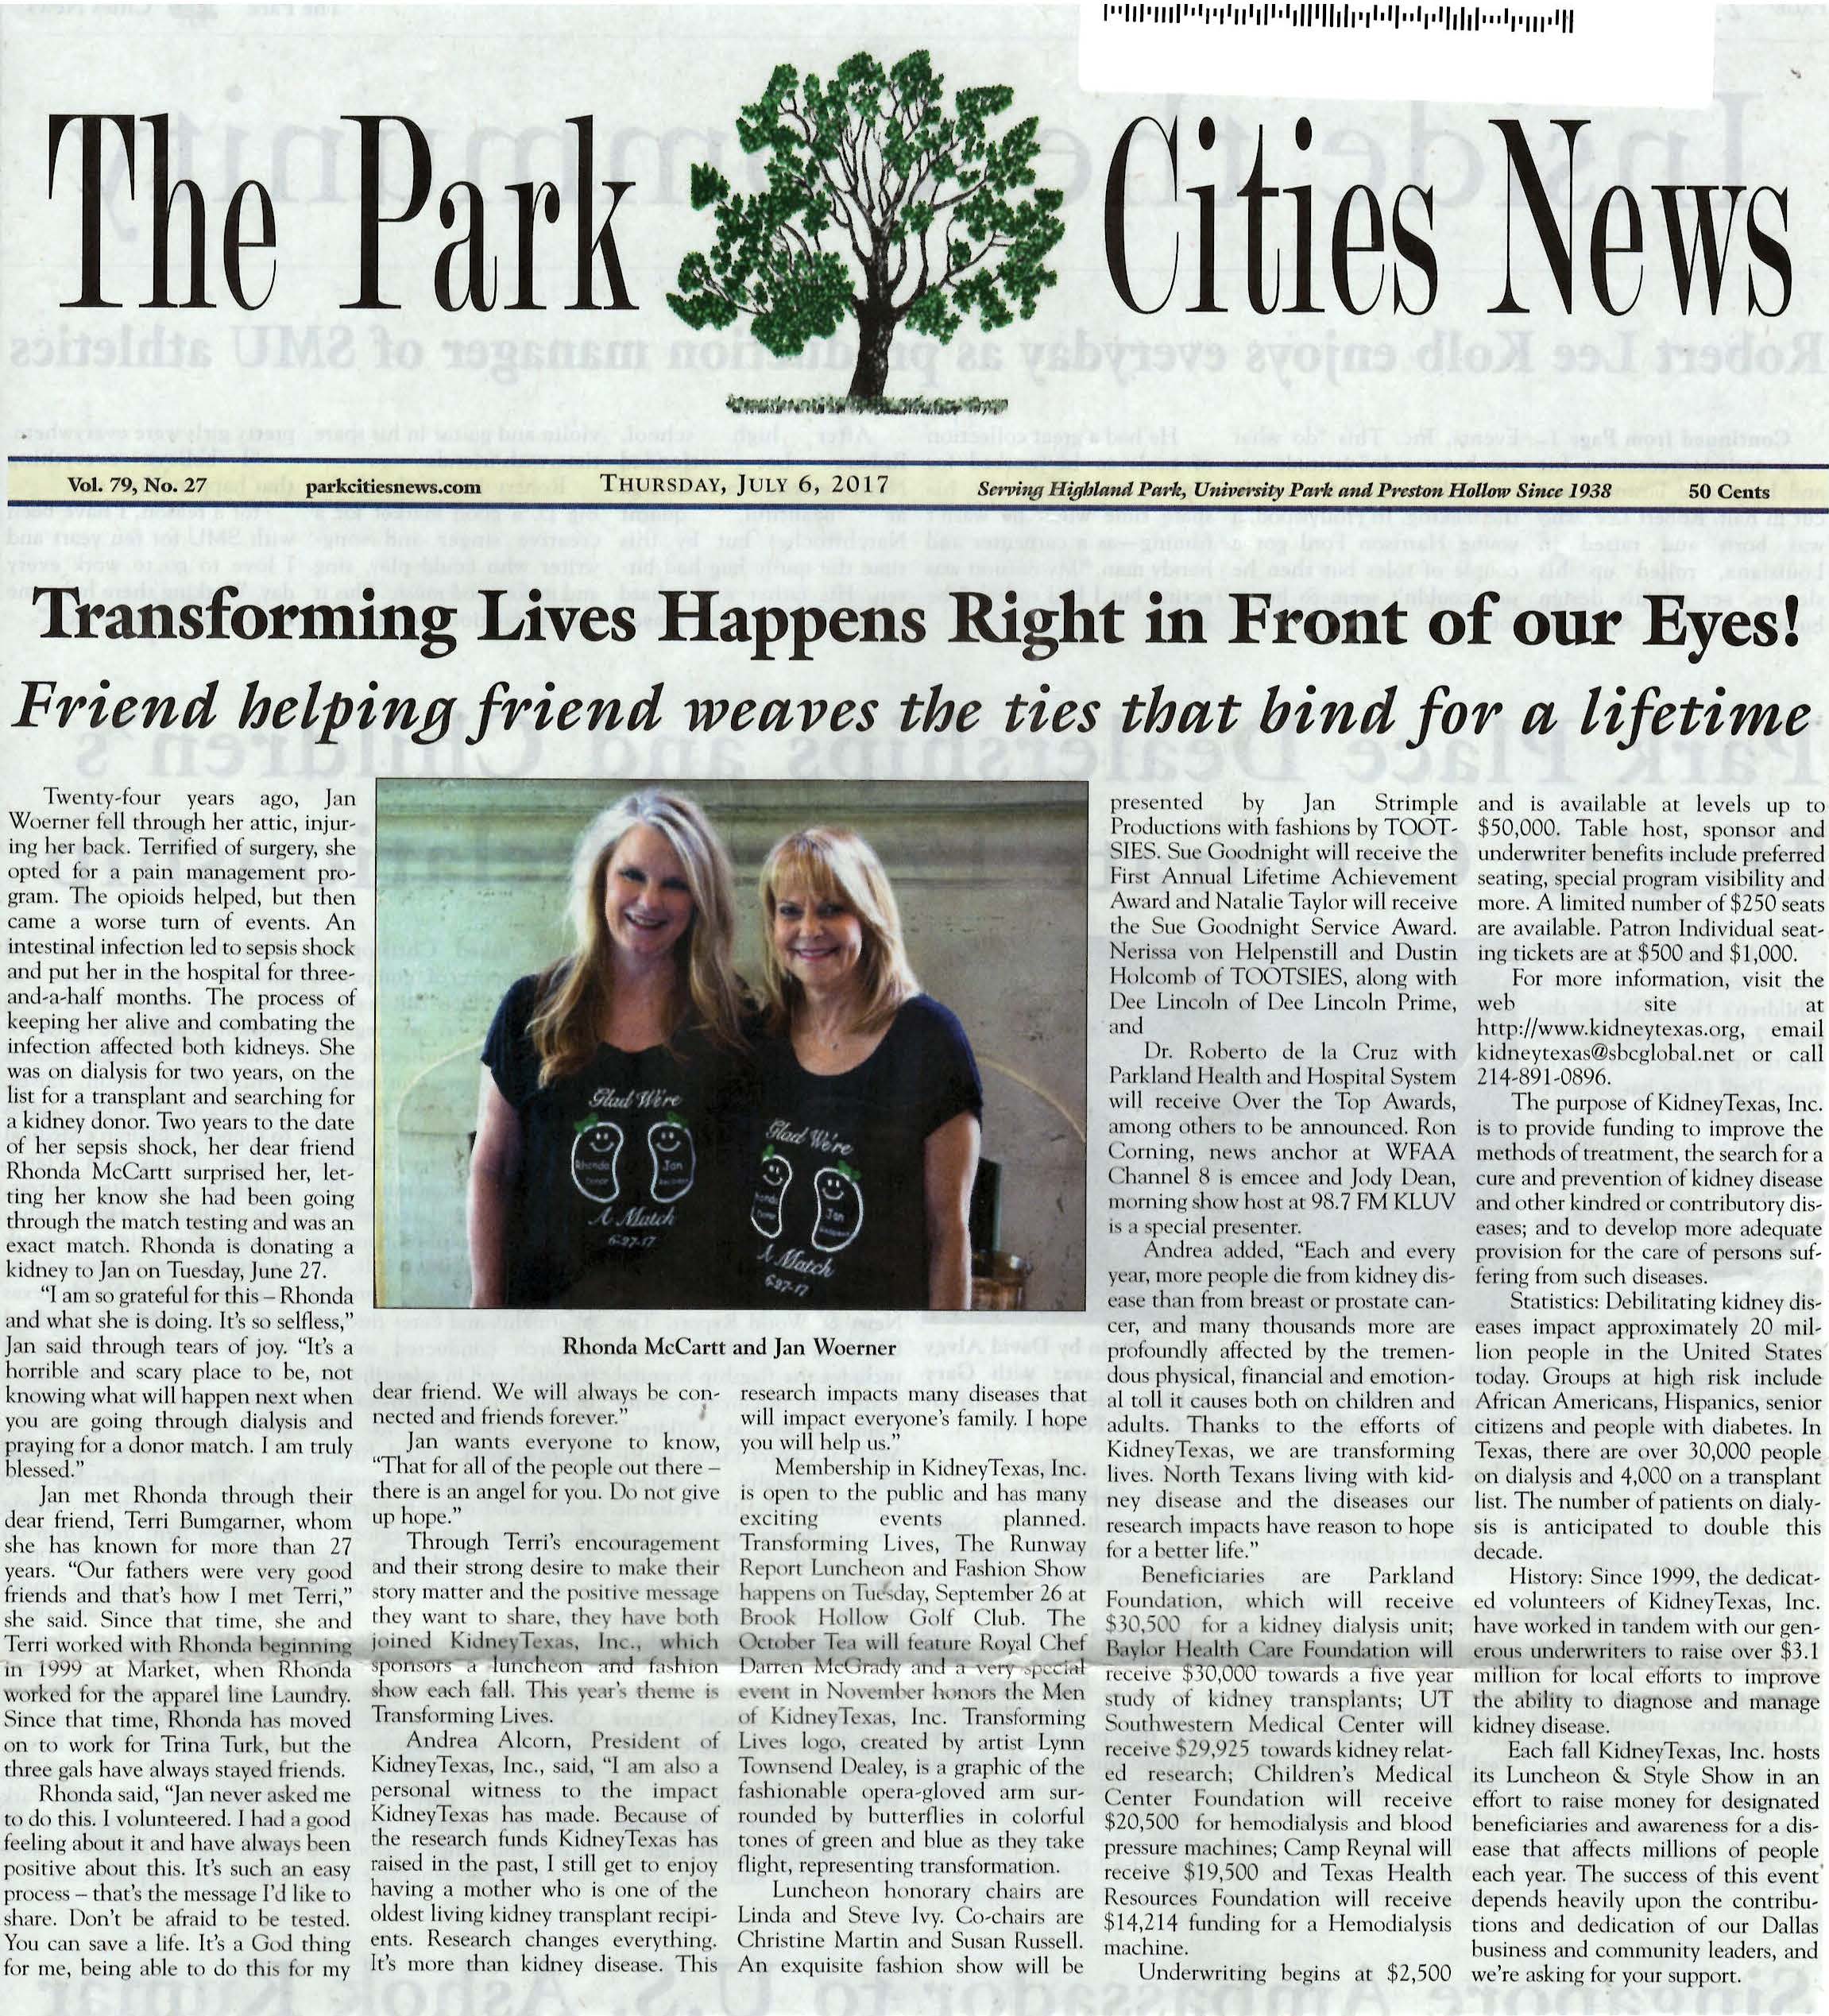 The Park Cities News - THANK YOU MARJ WATERS!